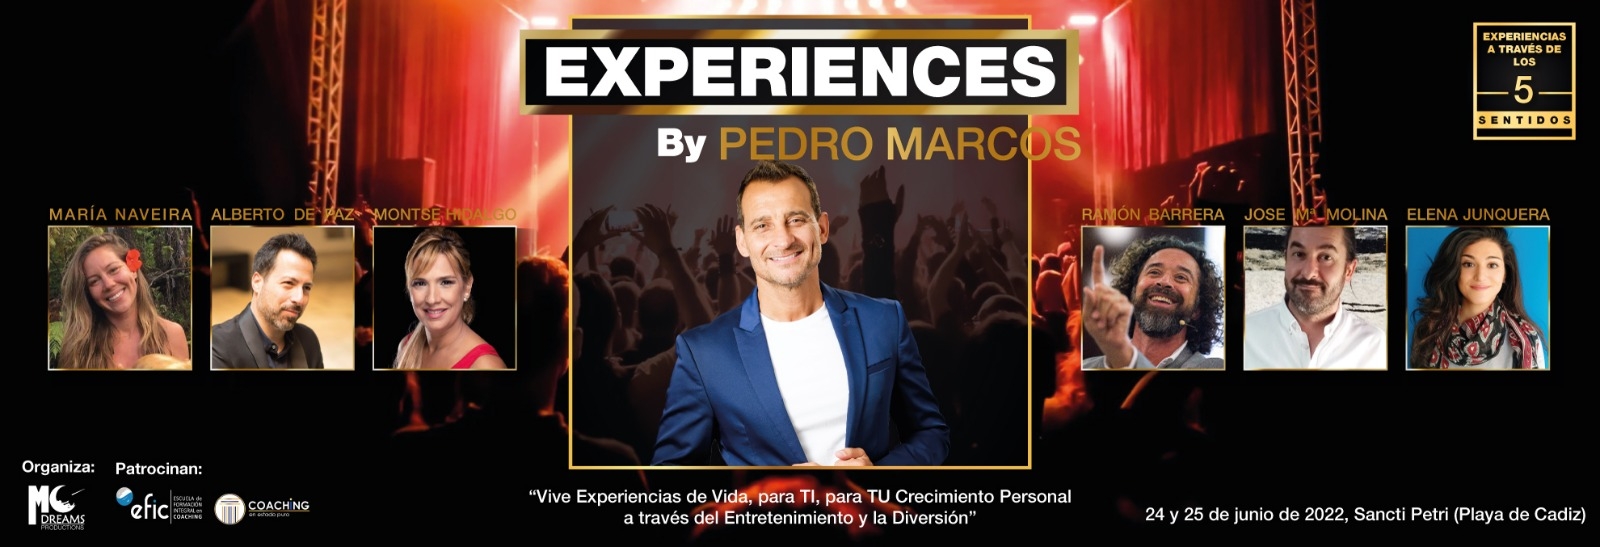 Experiences by Pedro Marcos